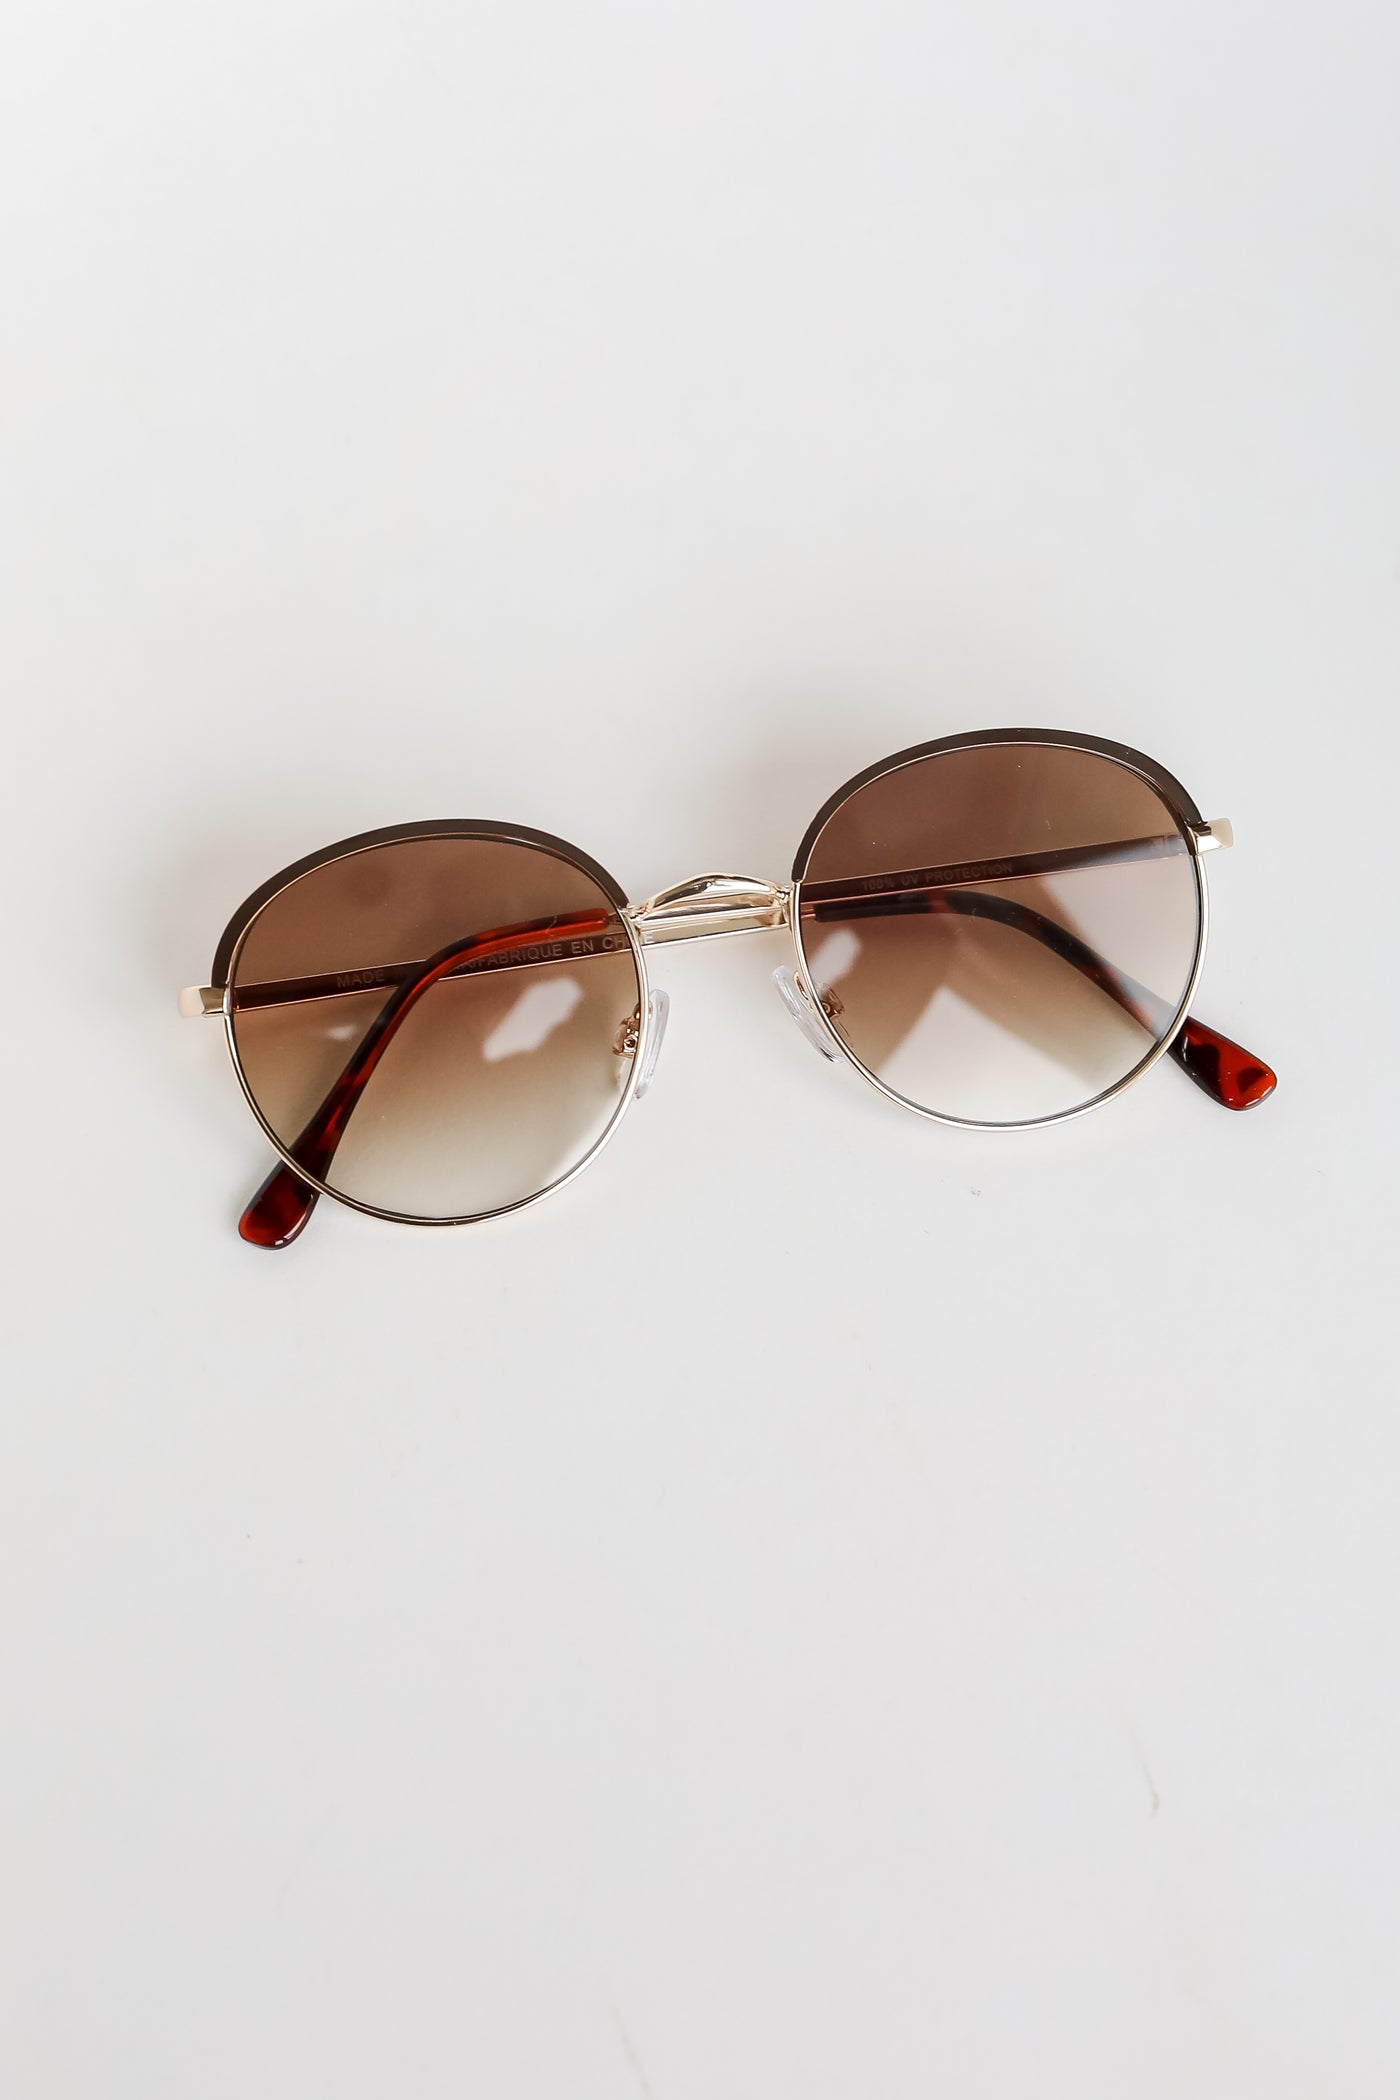 Throwing Shade Brown Round Sunglasses cheap sunglasses for women